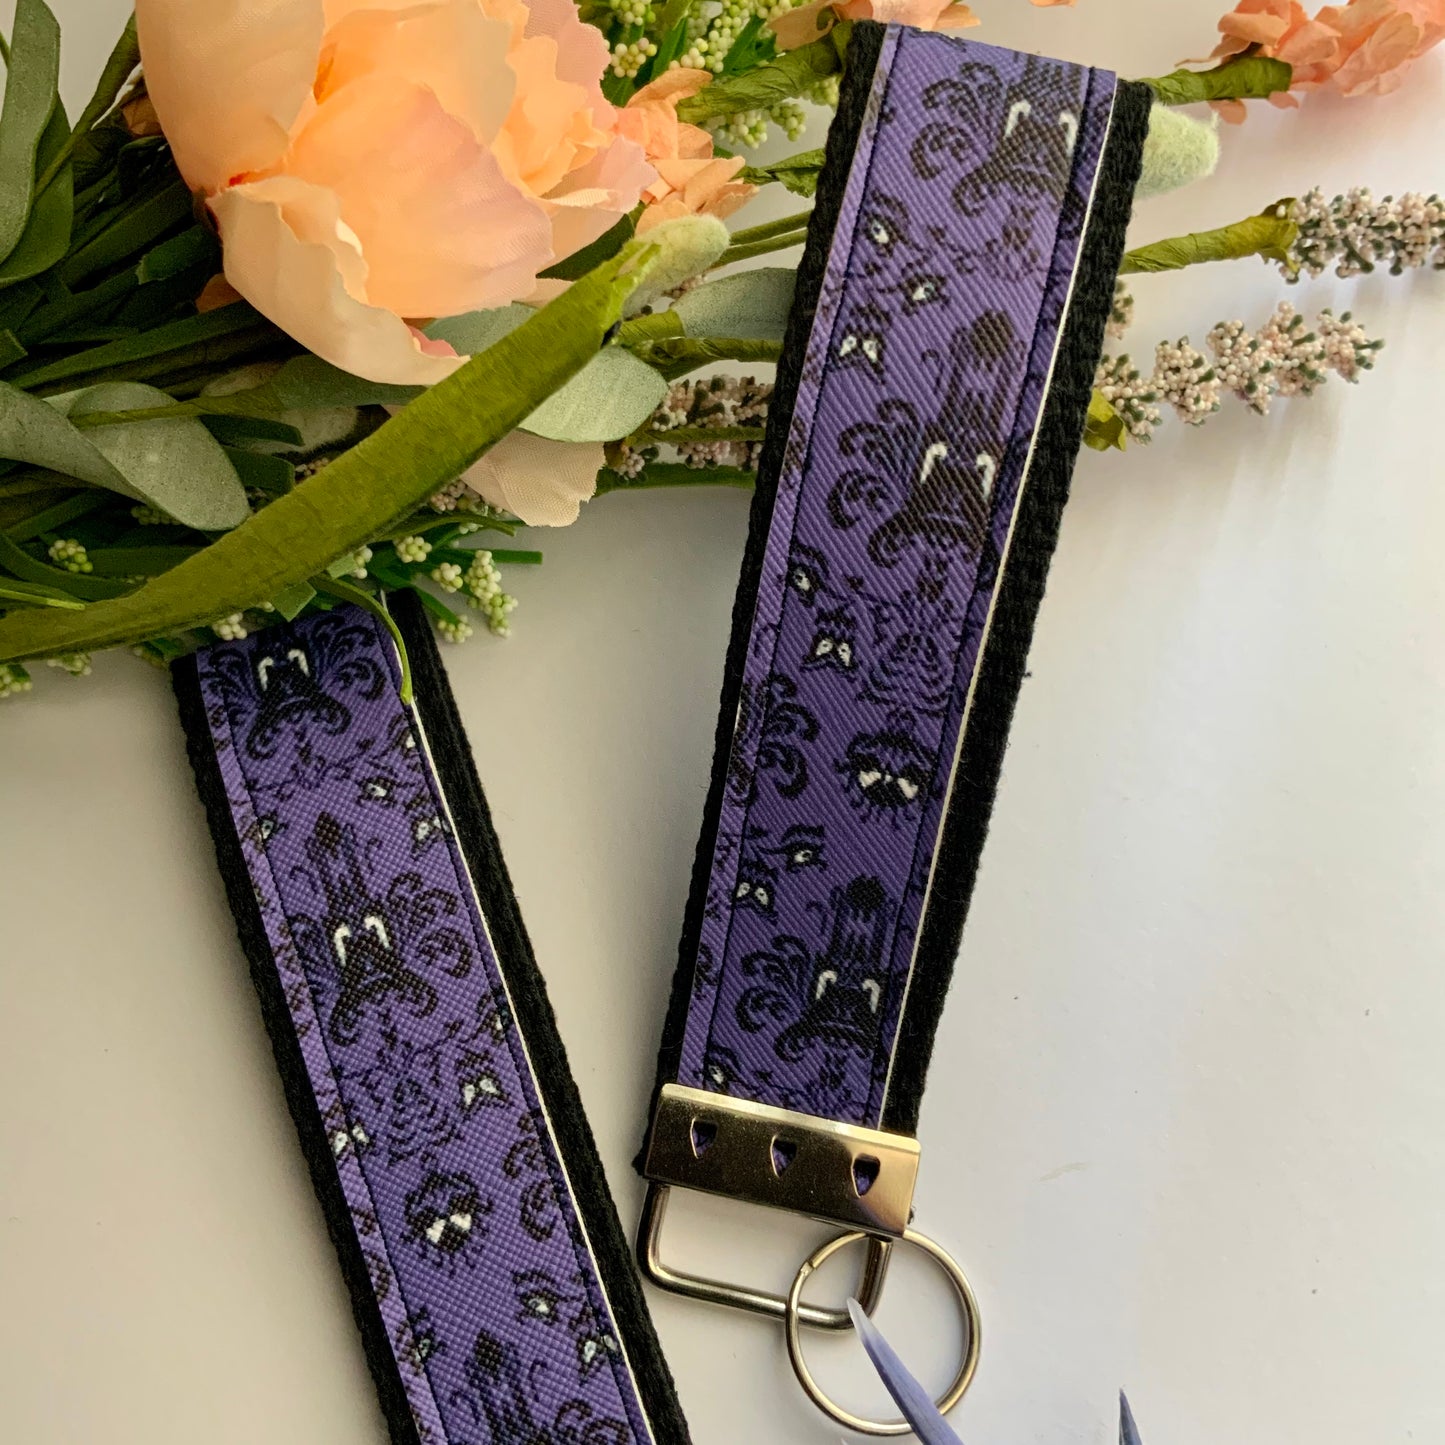 Haunted Mansion Wallpaper Disney Faux Leather Print Wristlet Keychain for Keys, Wallets, Clutches - TinakayCreations